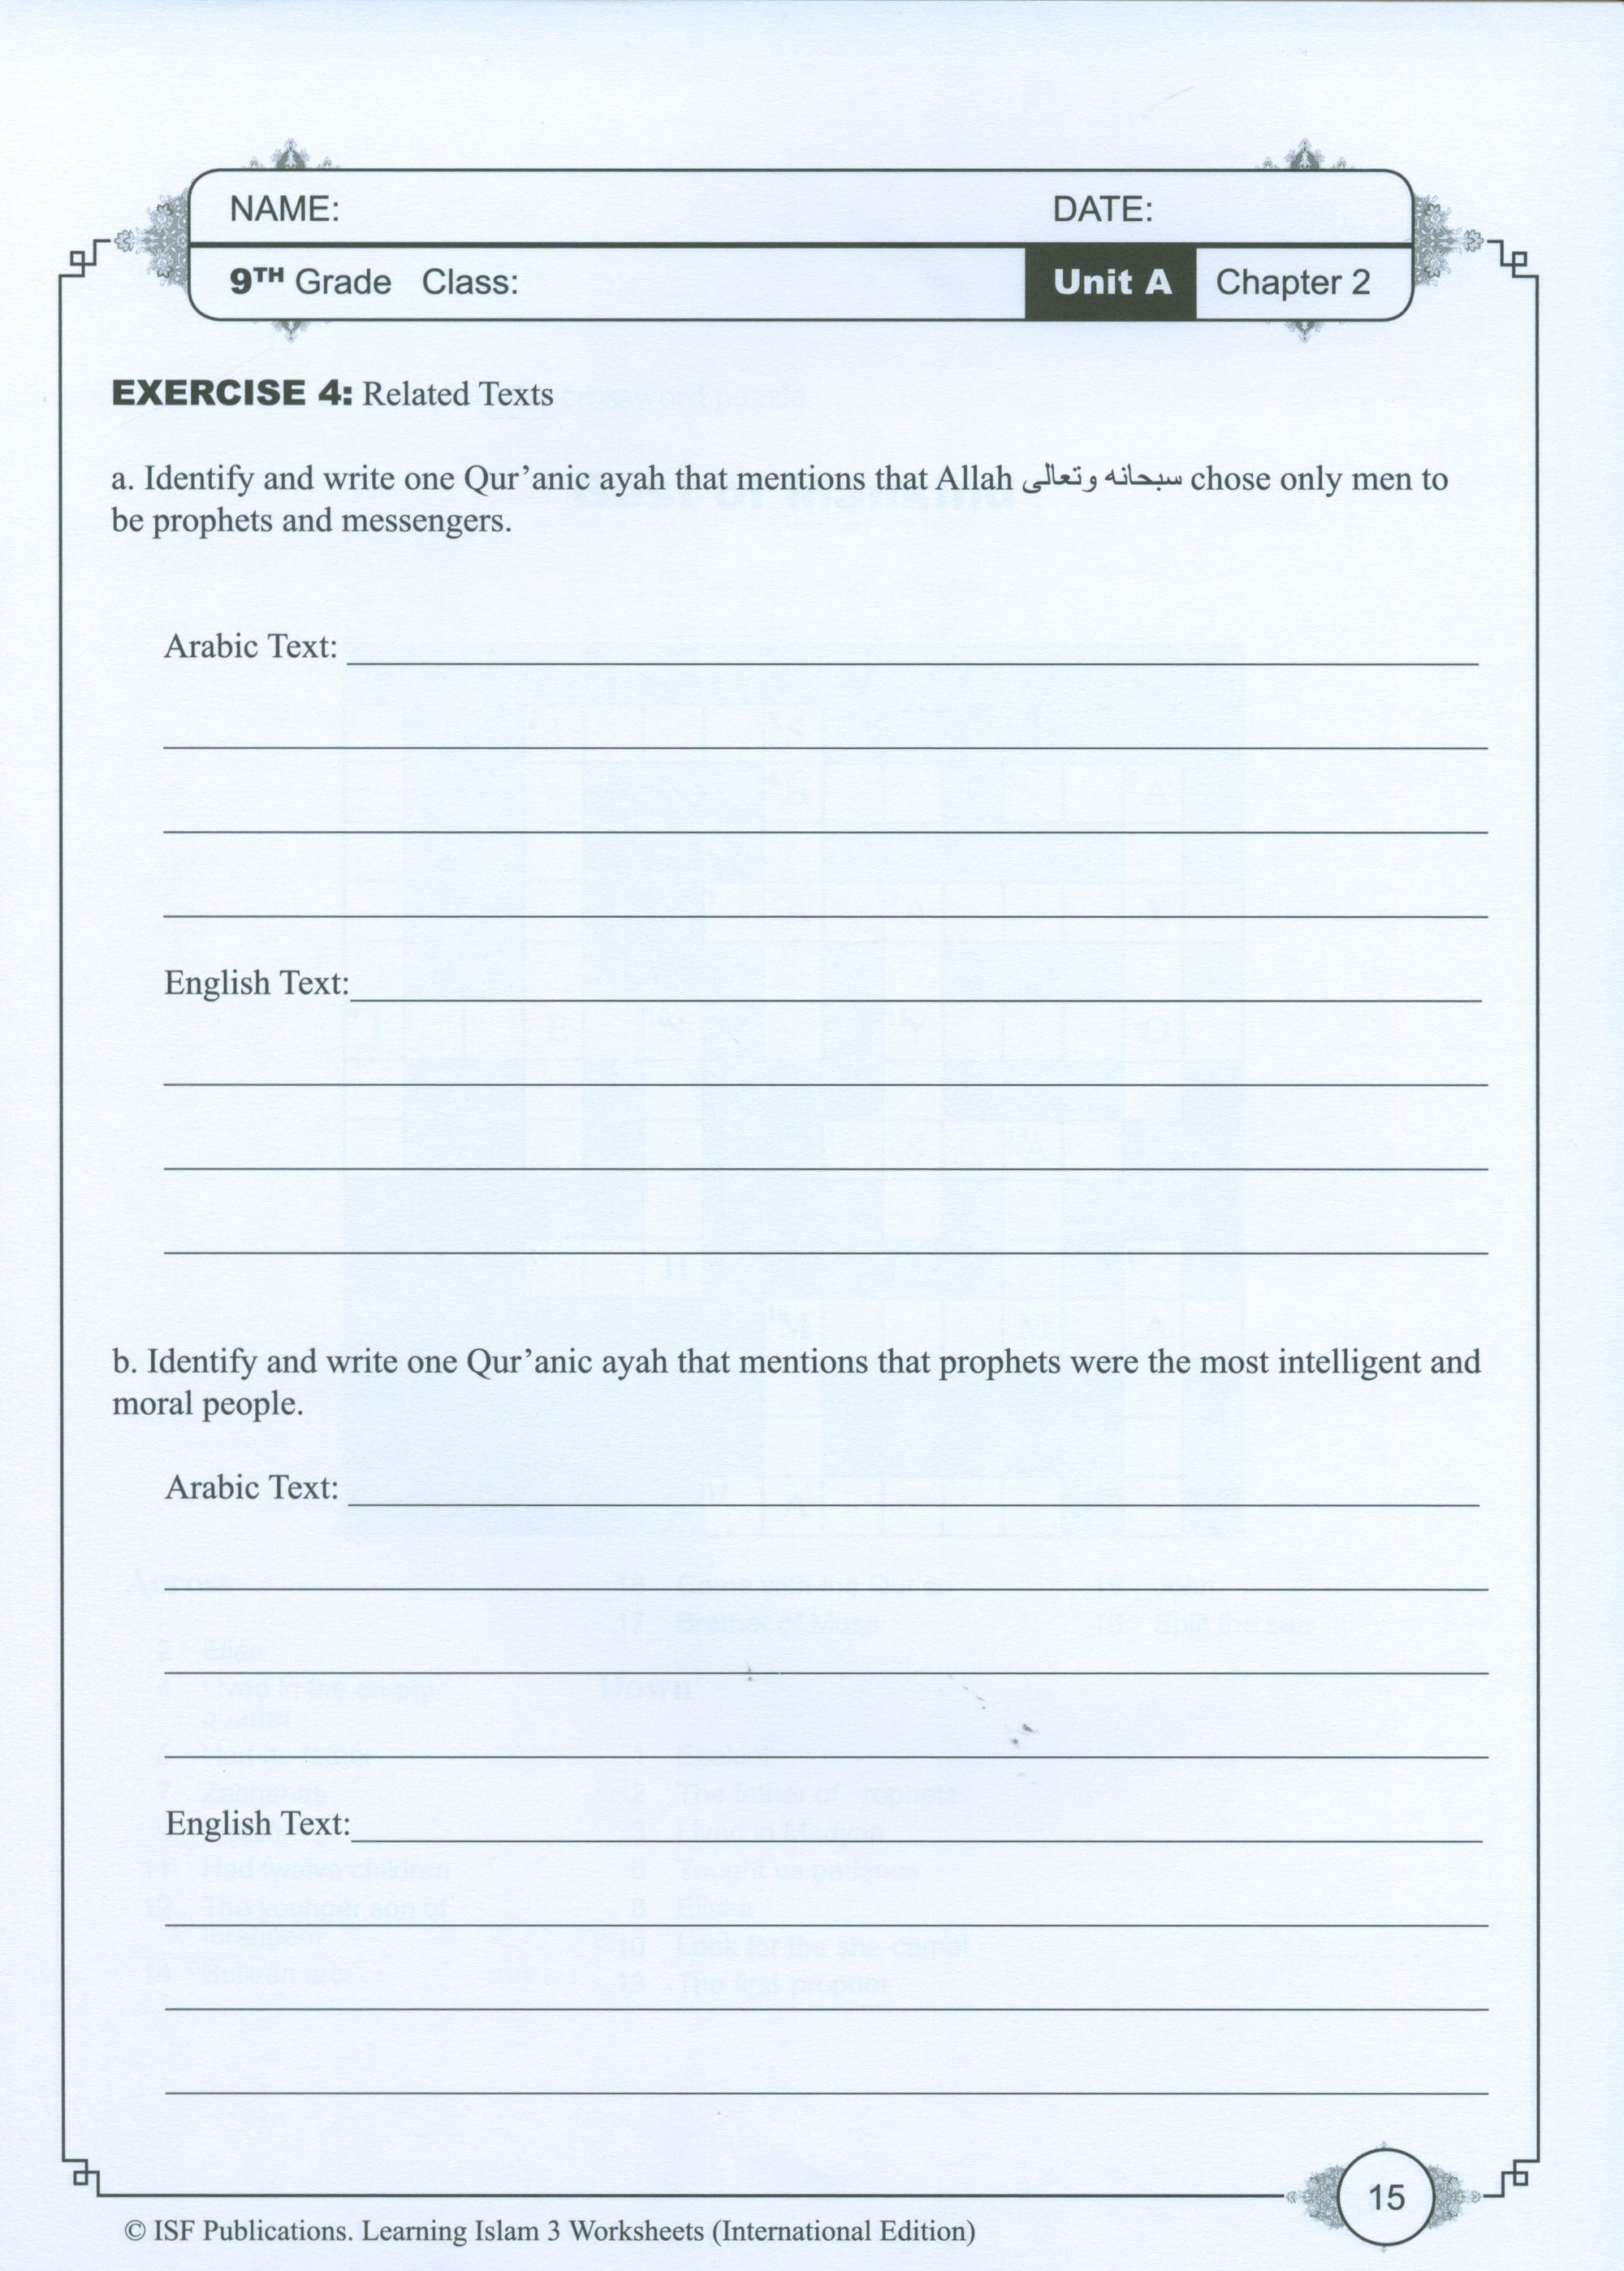 Learning Islam Weekend Edition Worksheets Level 3 (8th Grade)